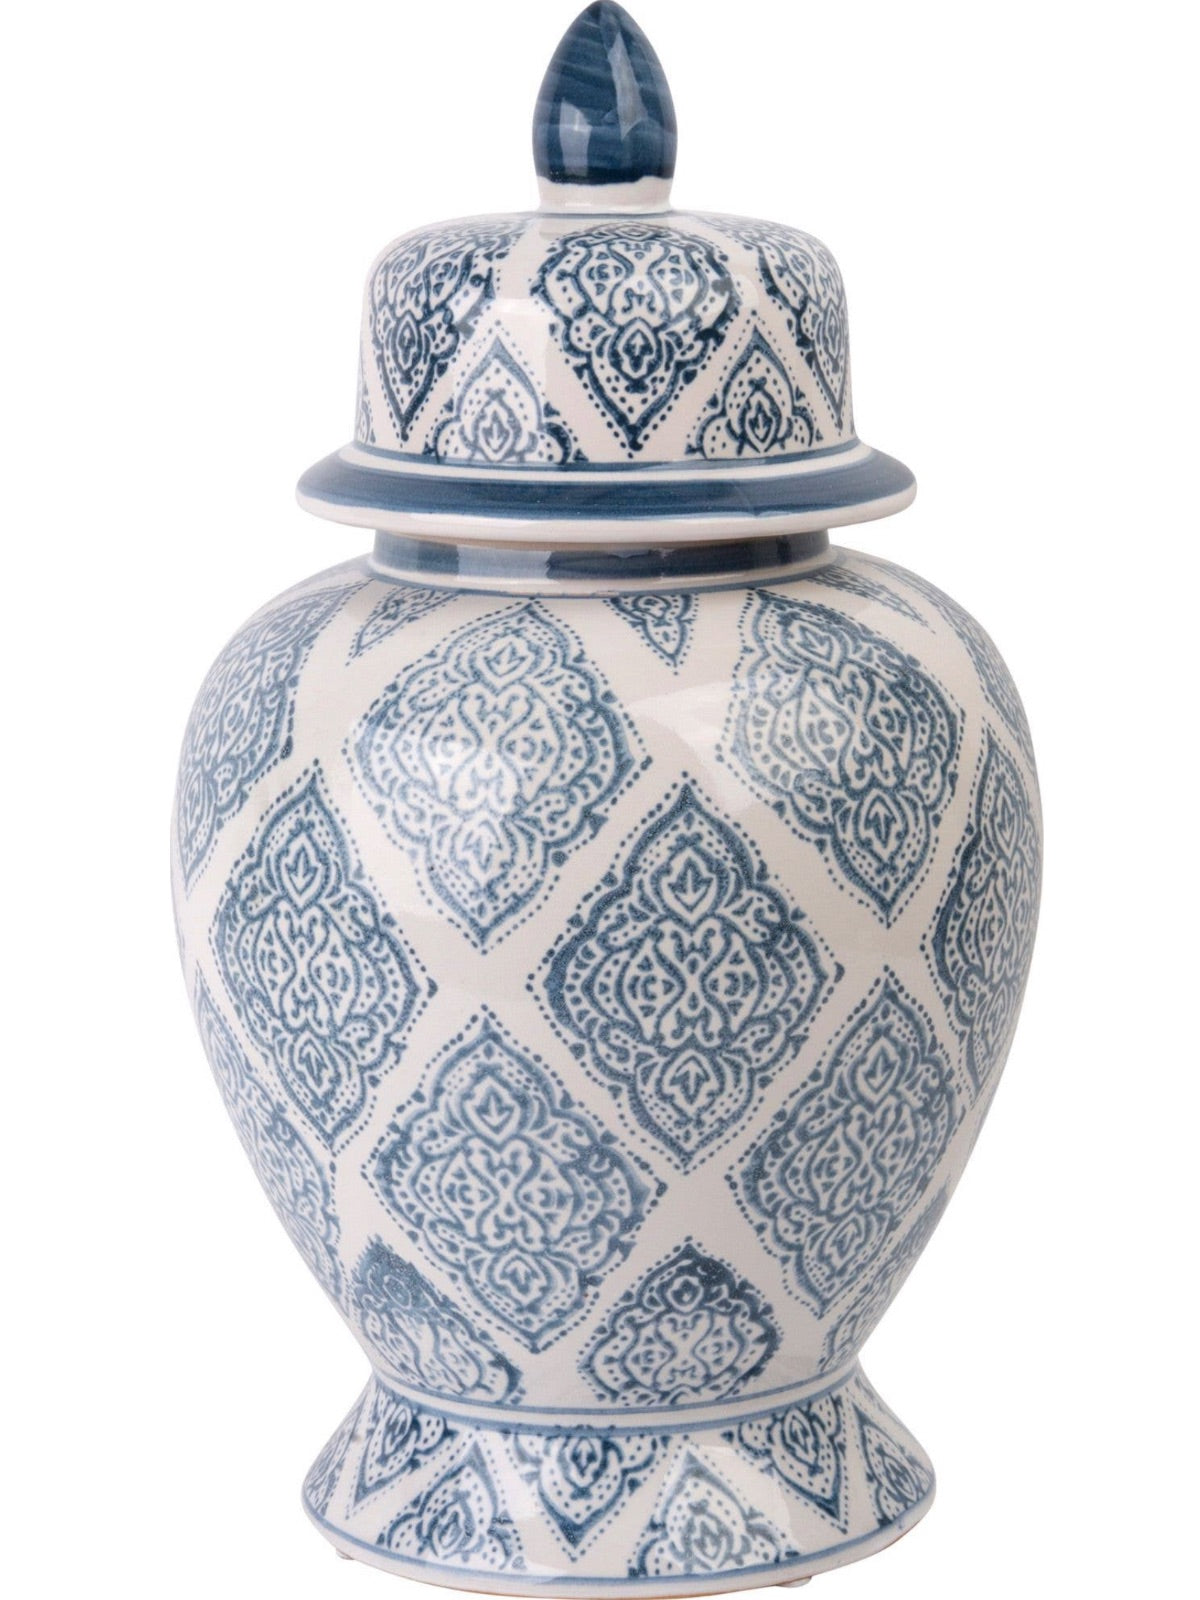 14H White and Gray Blue Porcelain Ginger Jar with Lid sold by KYA Home Decor.